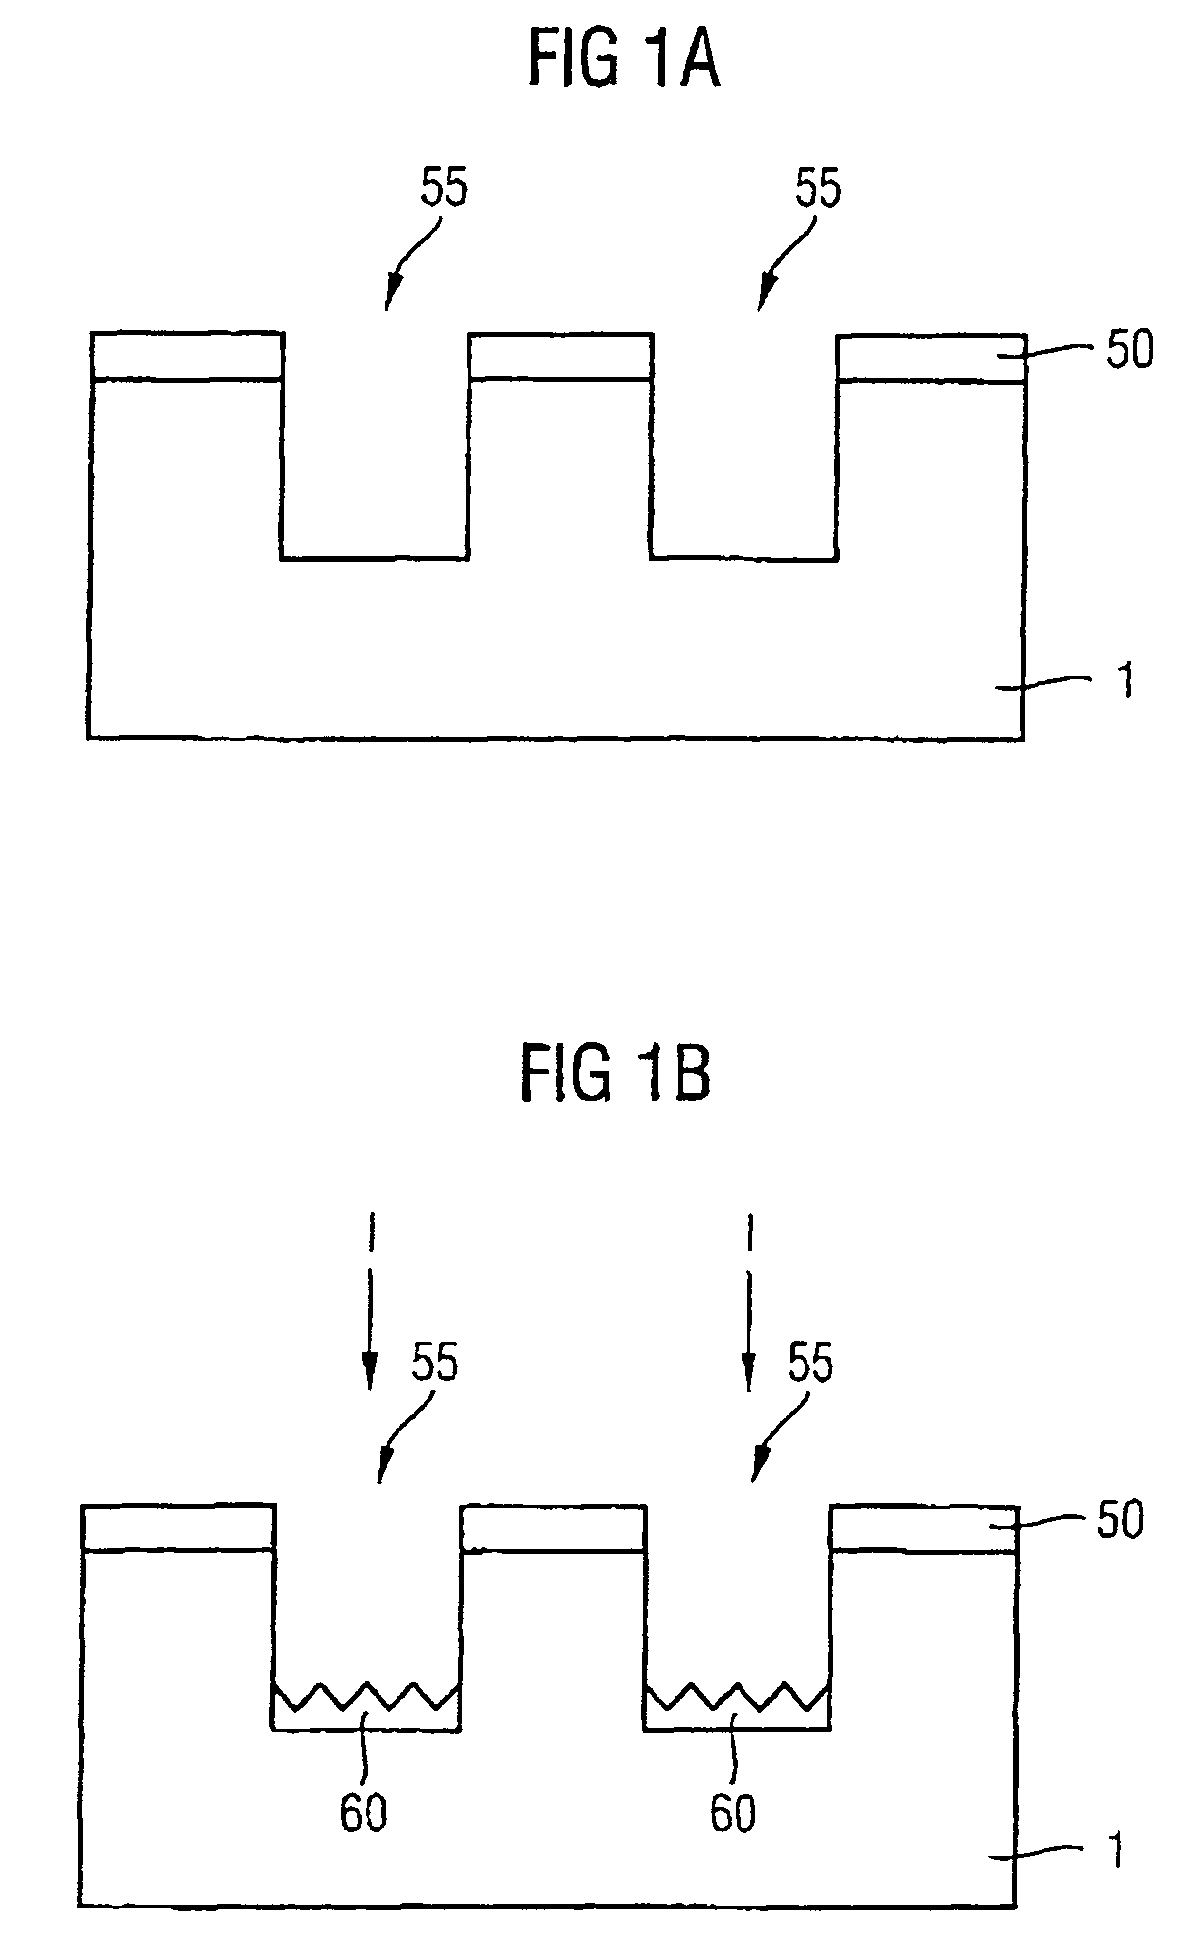 Method for fabricating a photomask for an integrated circuit and corresponding photomask